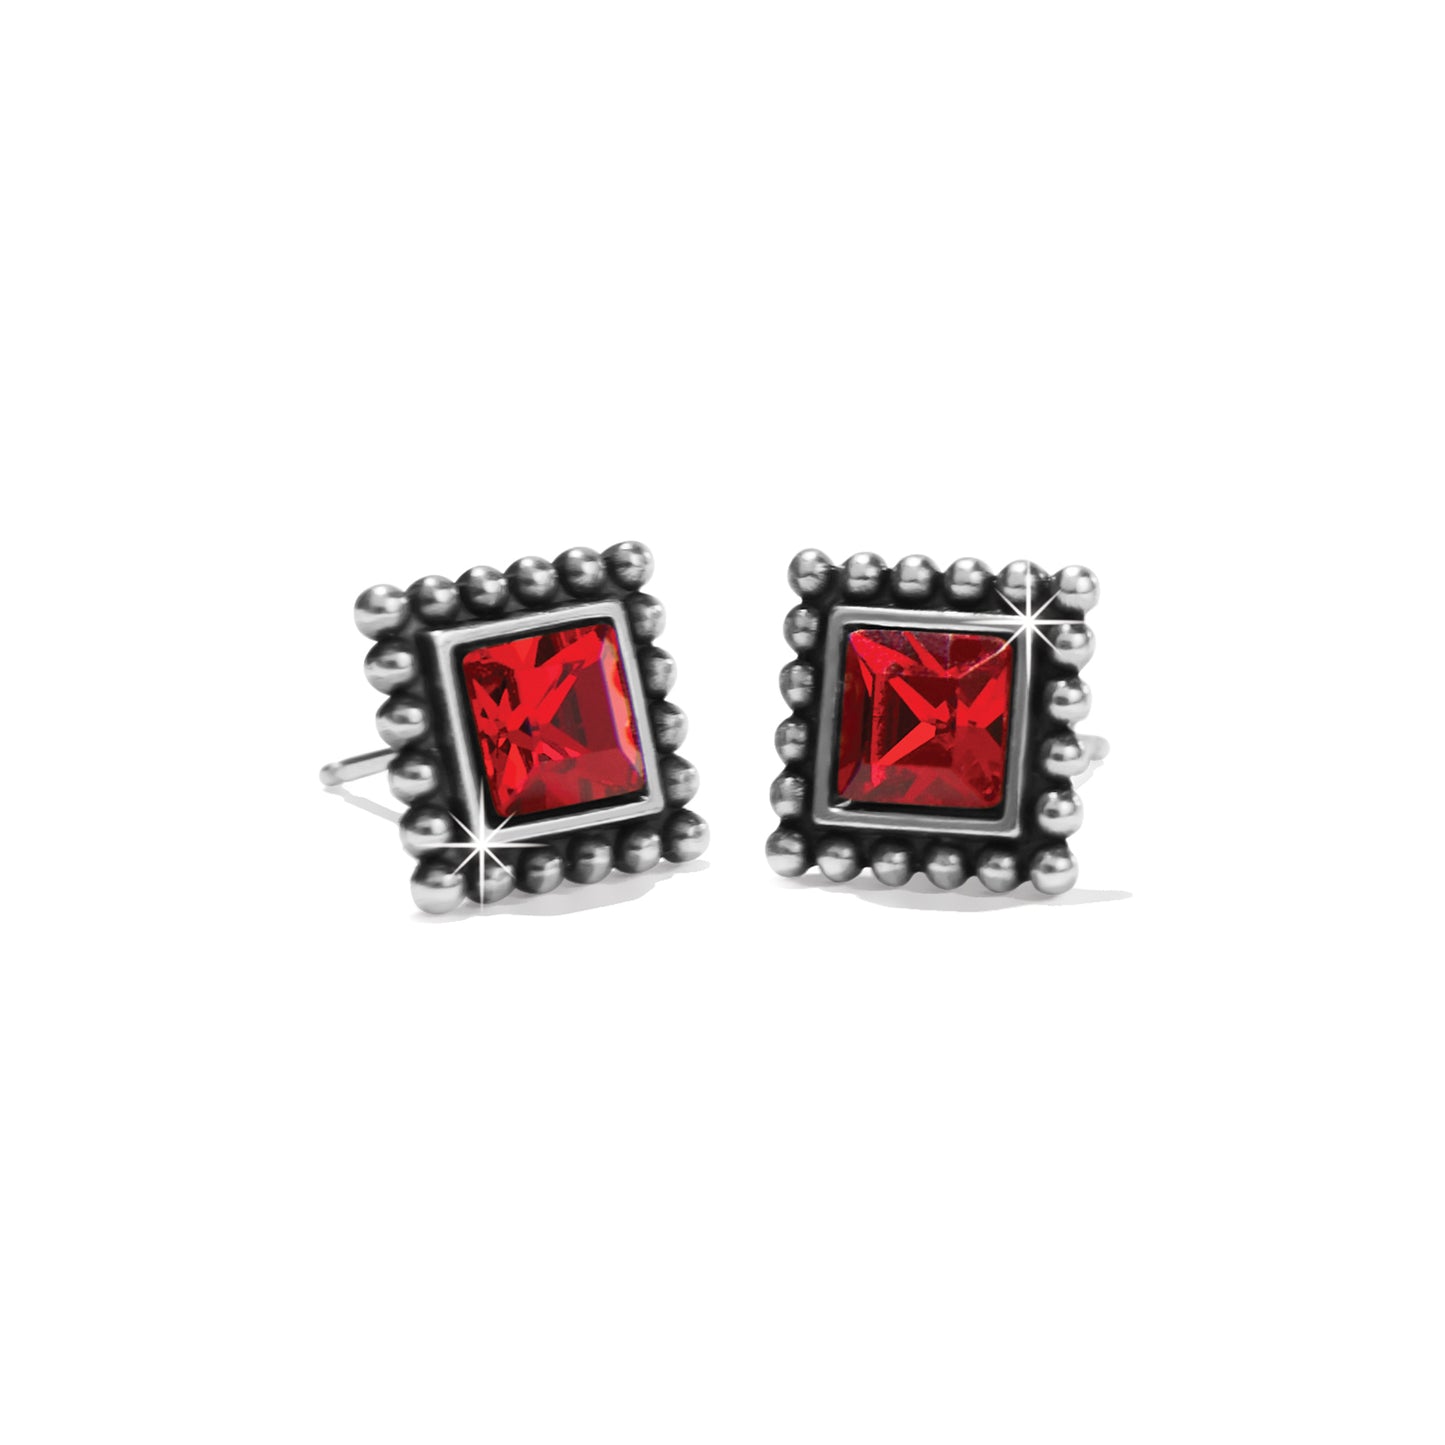 Sparkle Square Mini Post Earrings - Red